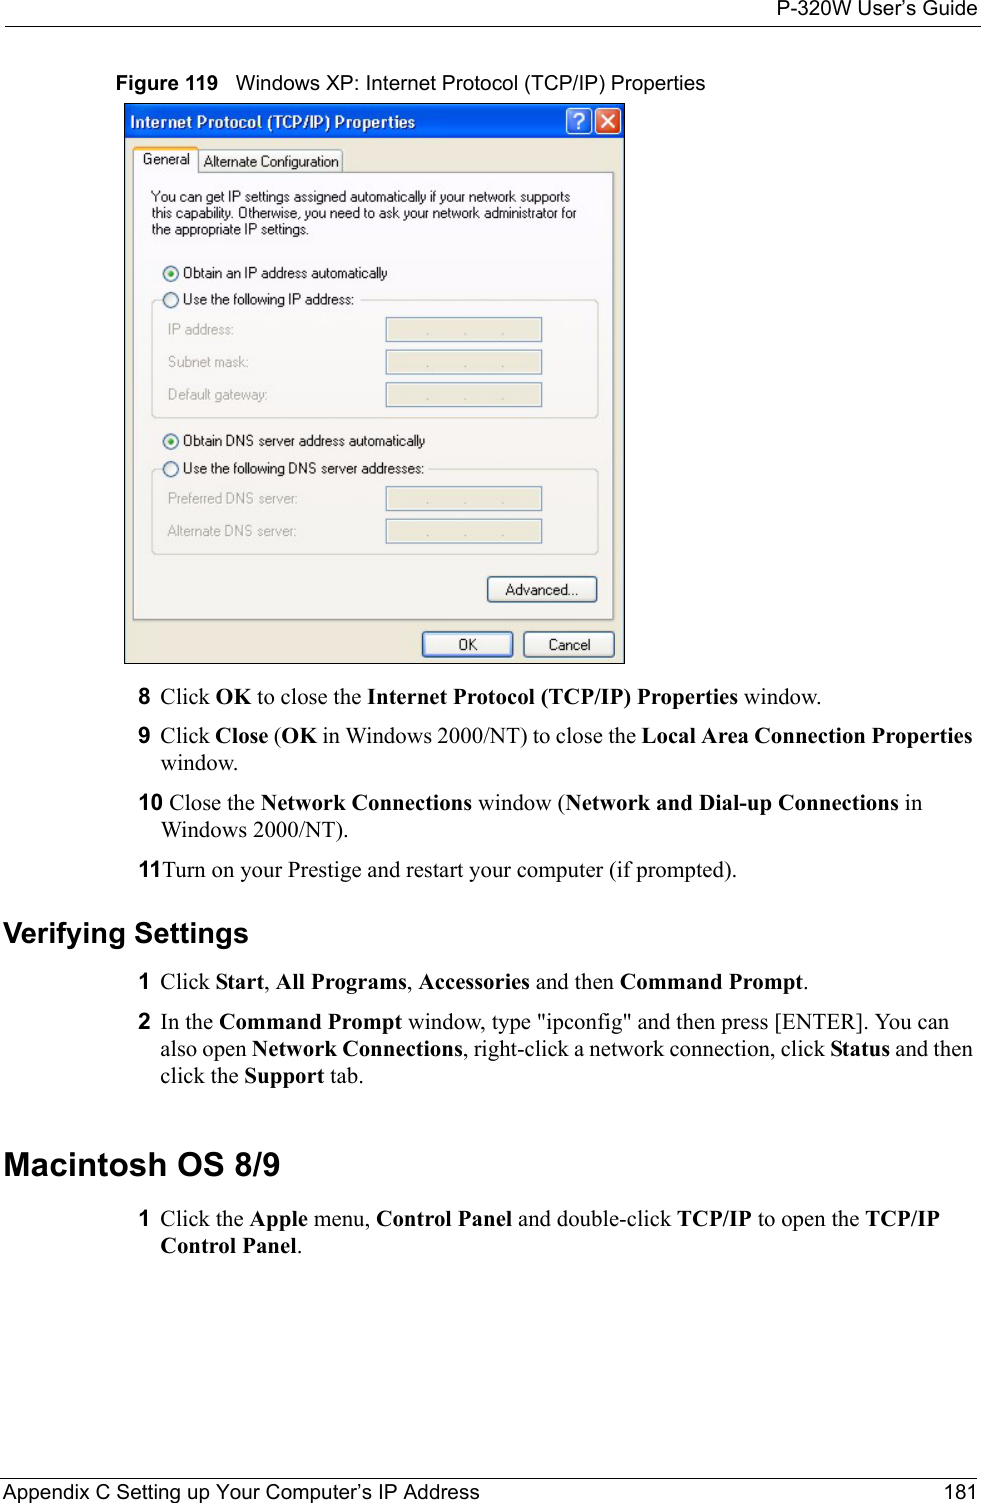 P-320W User’s GuideAppendix C Setting up Your Computer’s IP Address 181Figure 119   Windows XP: Internet Protocol (TCP/IP) Properties8Click OK to close the Internet Protocol (TCP/IP) Properties window.9Click Close (OK in Windows 2000/NT) to close the Local Area Connection Properties window.10 Close the Network Connections window (Network and Dial-up Connections in Windows 2000/NT).11Turn on your Prestige and restart your computer (if prompted).Verifying Settings1Click Start, All Programs, Accessories and then Command Prompt.2In the Command Prompt window, type &quot;ipconfig&quot; and then press [ENTER]. You can also open Network Connections, right-click a network connection, click Status and then click the Support tab.Macintosh OS 8/9 1Click the Apple menu, Control Panel and double-click TCP/IP to open the TCP/IP Control Panel.